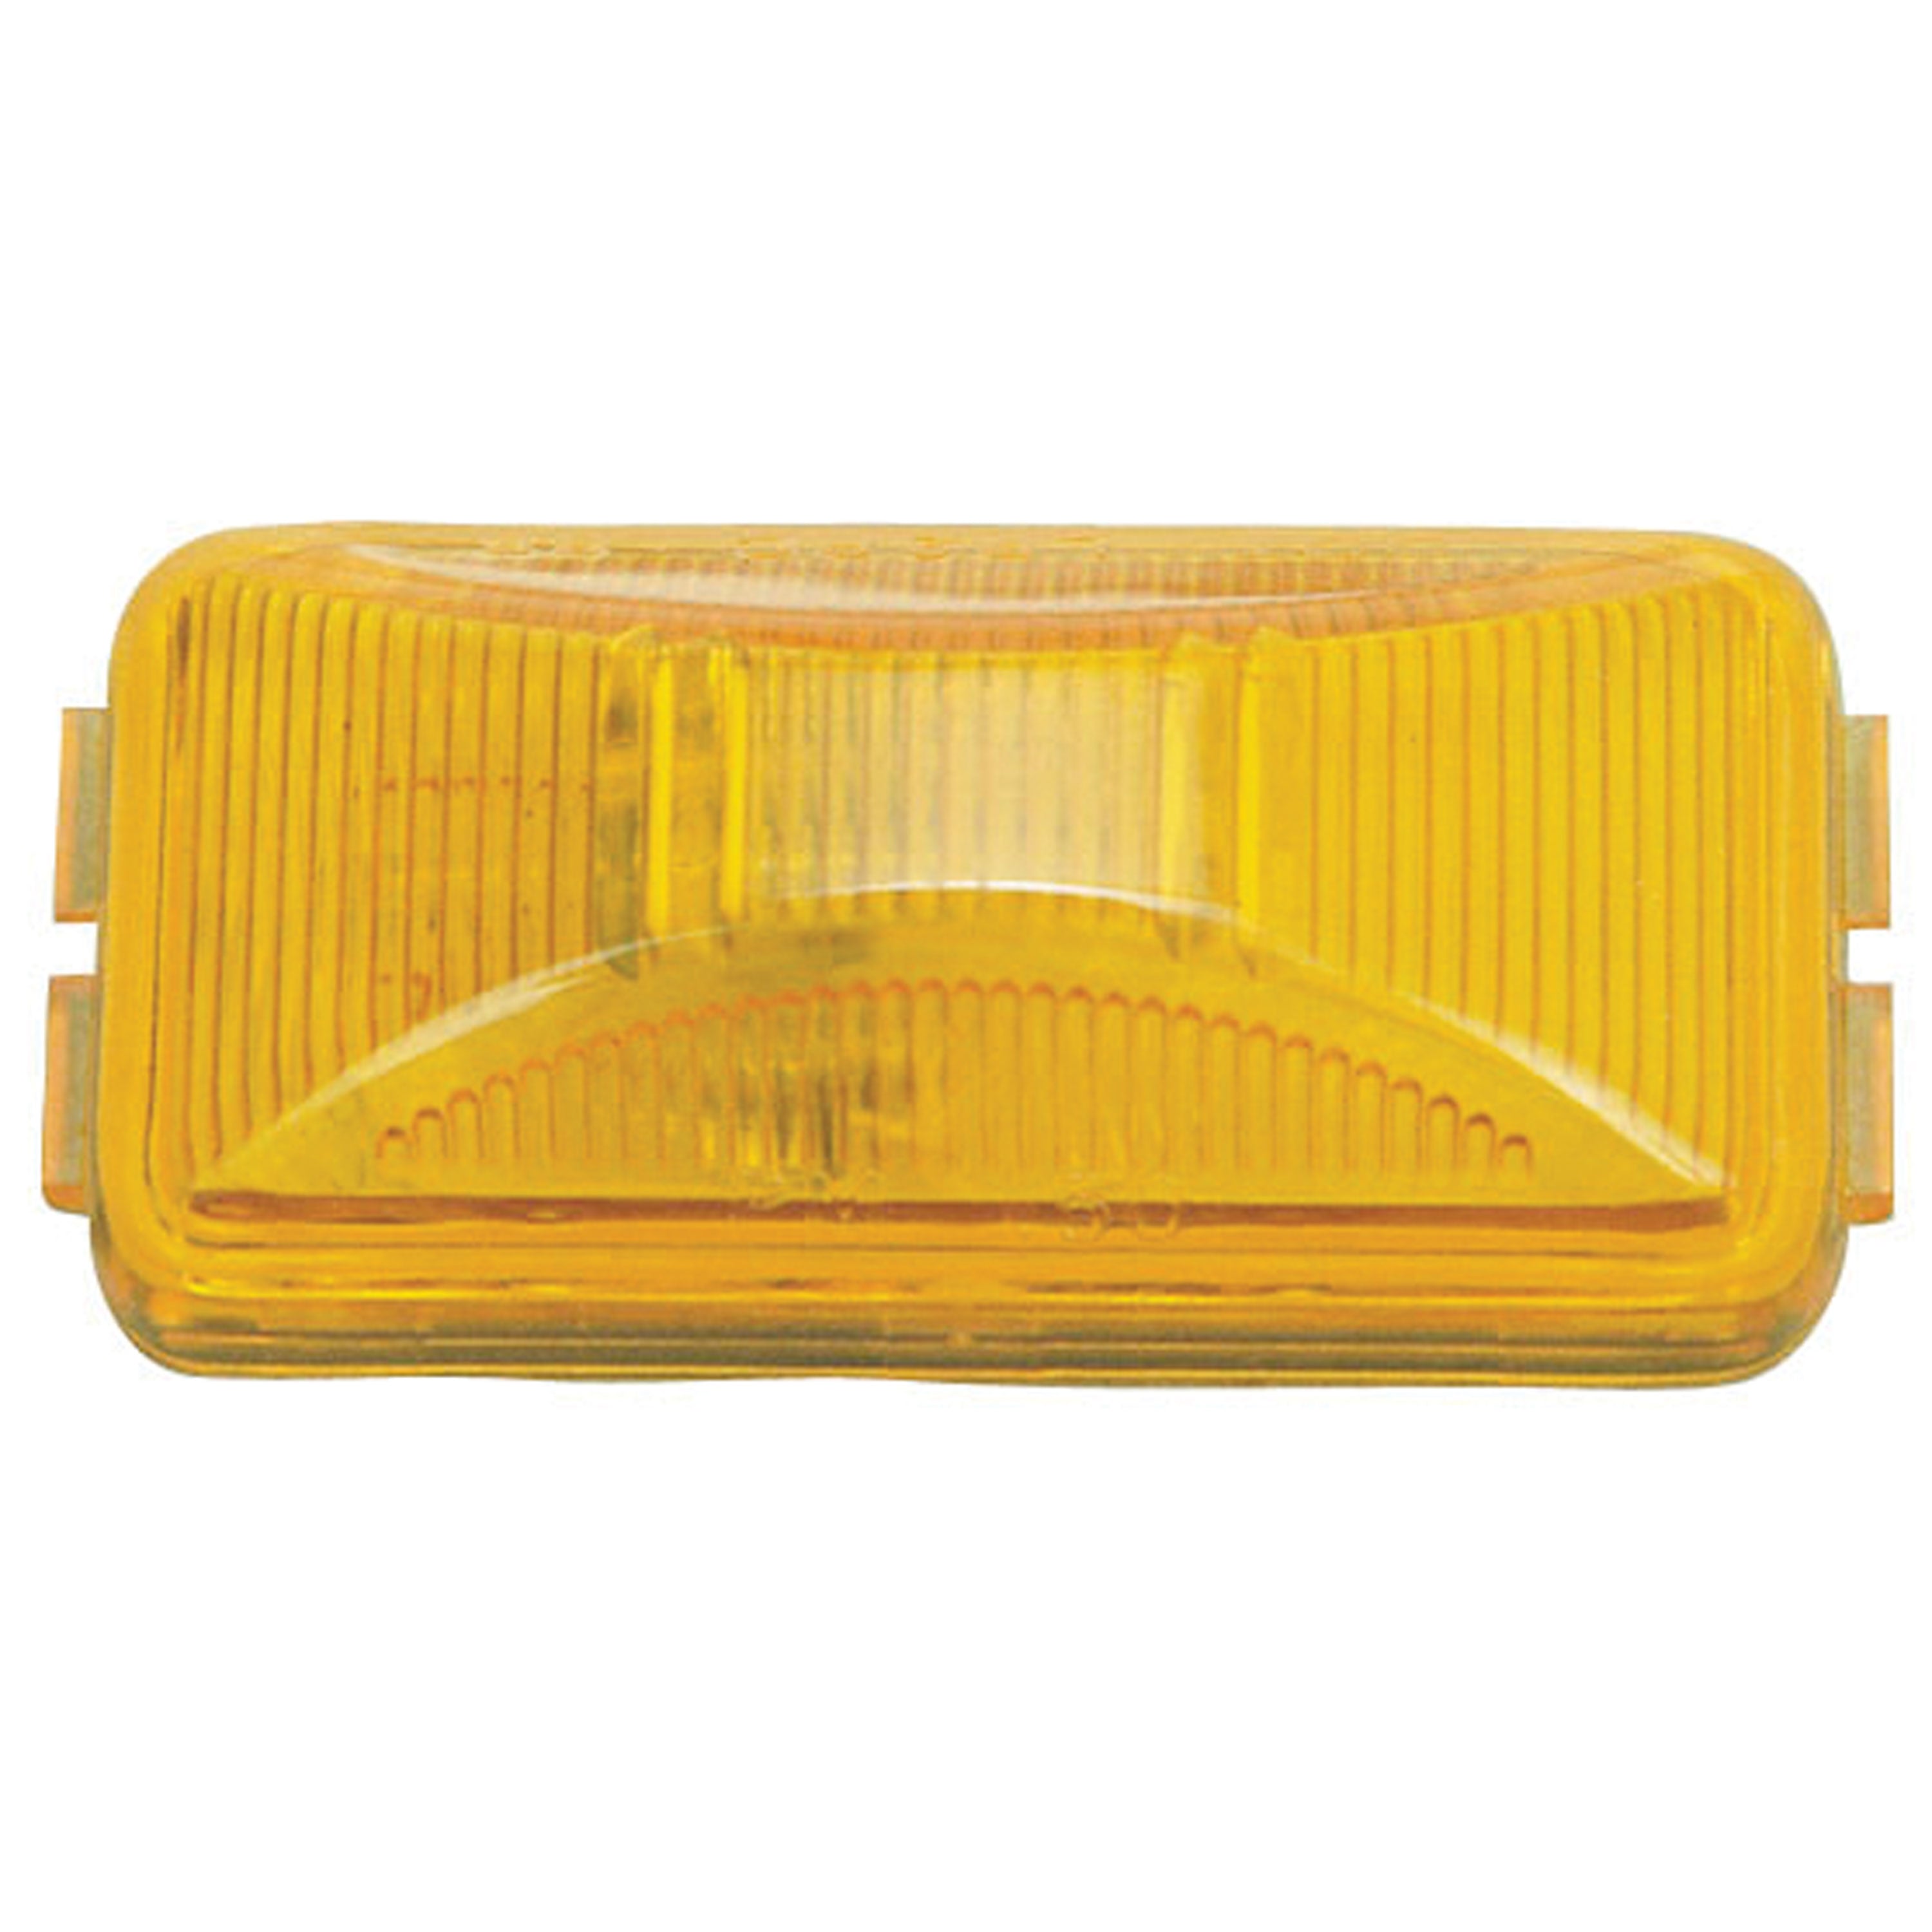 Peterson E150A The 150 Series Sealed Clearance/Side Marker Light Only - Amber